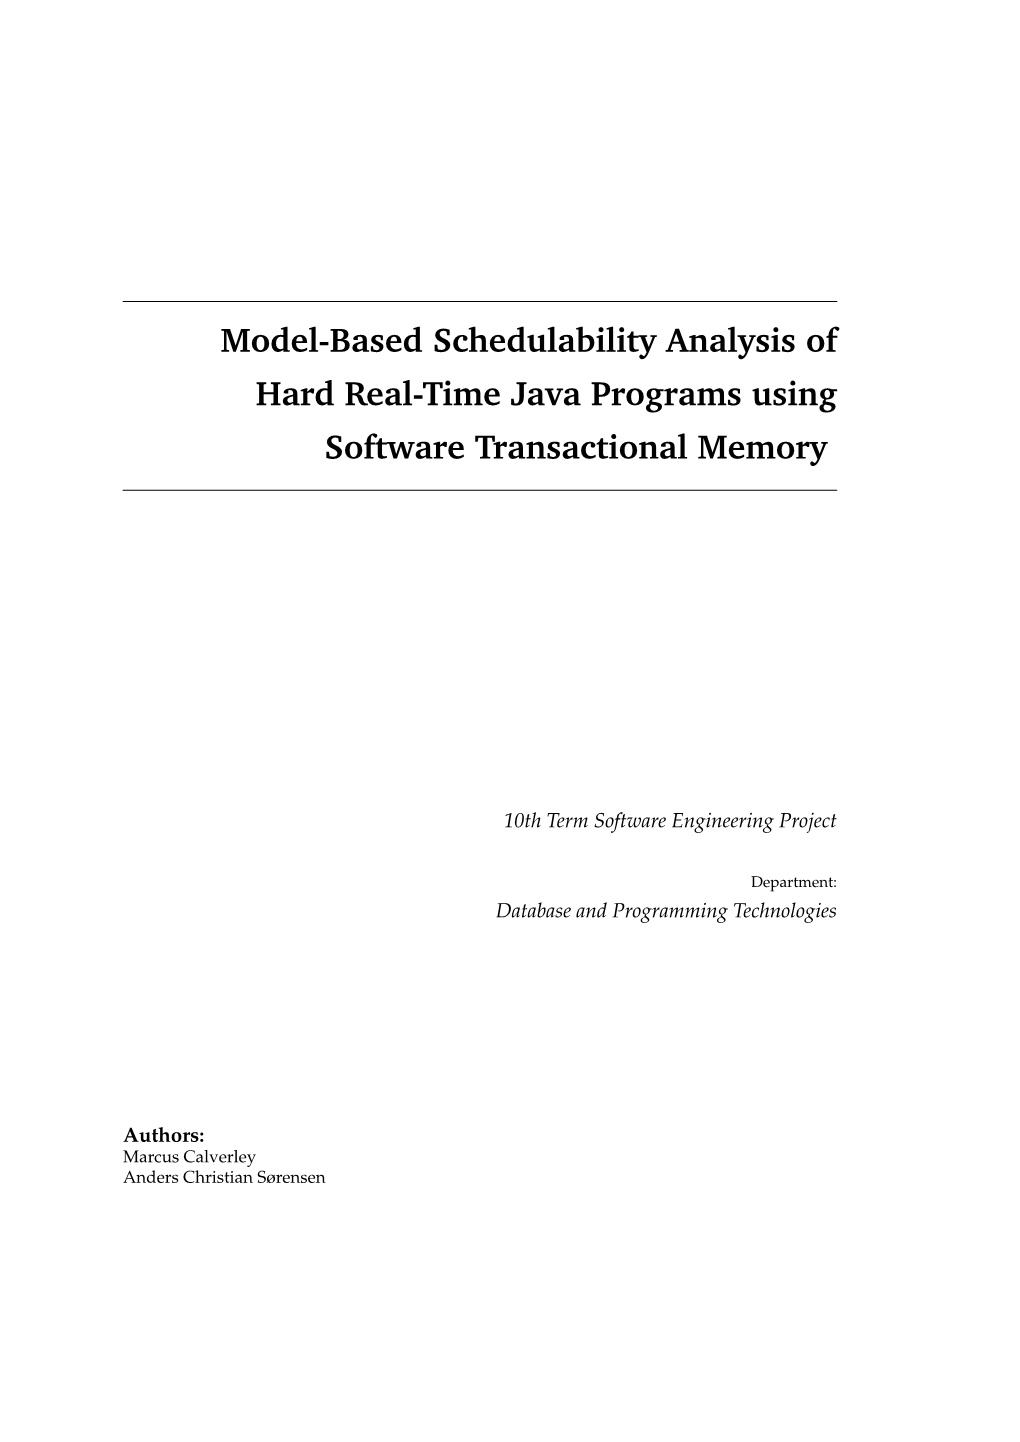 Model-Based Schedulability Analysis of Hard Real-Time Java Programs Using Software Transactional Memory